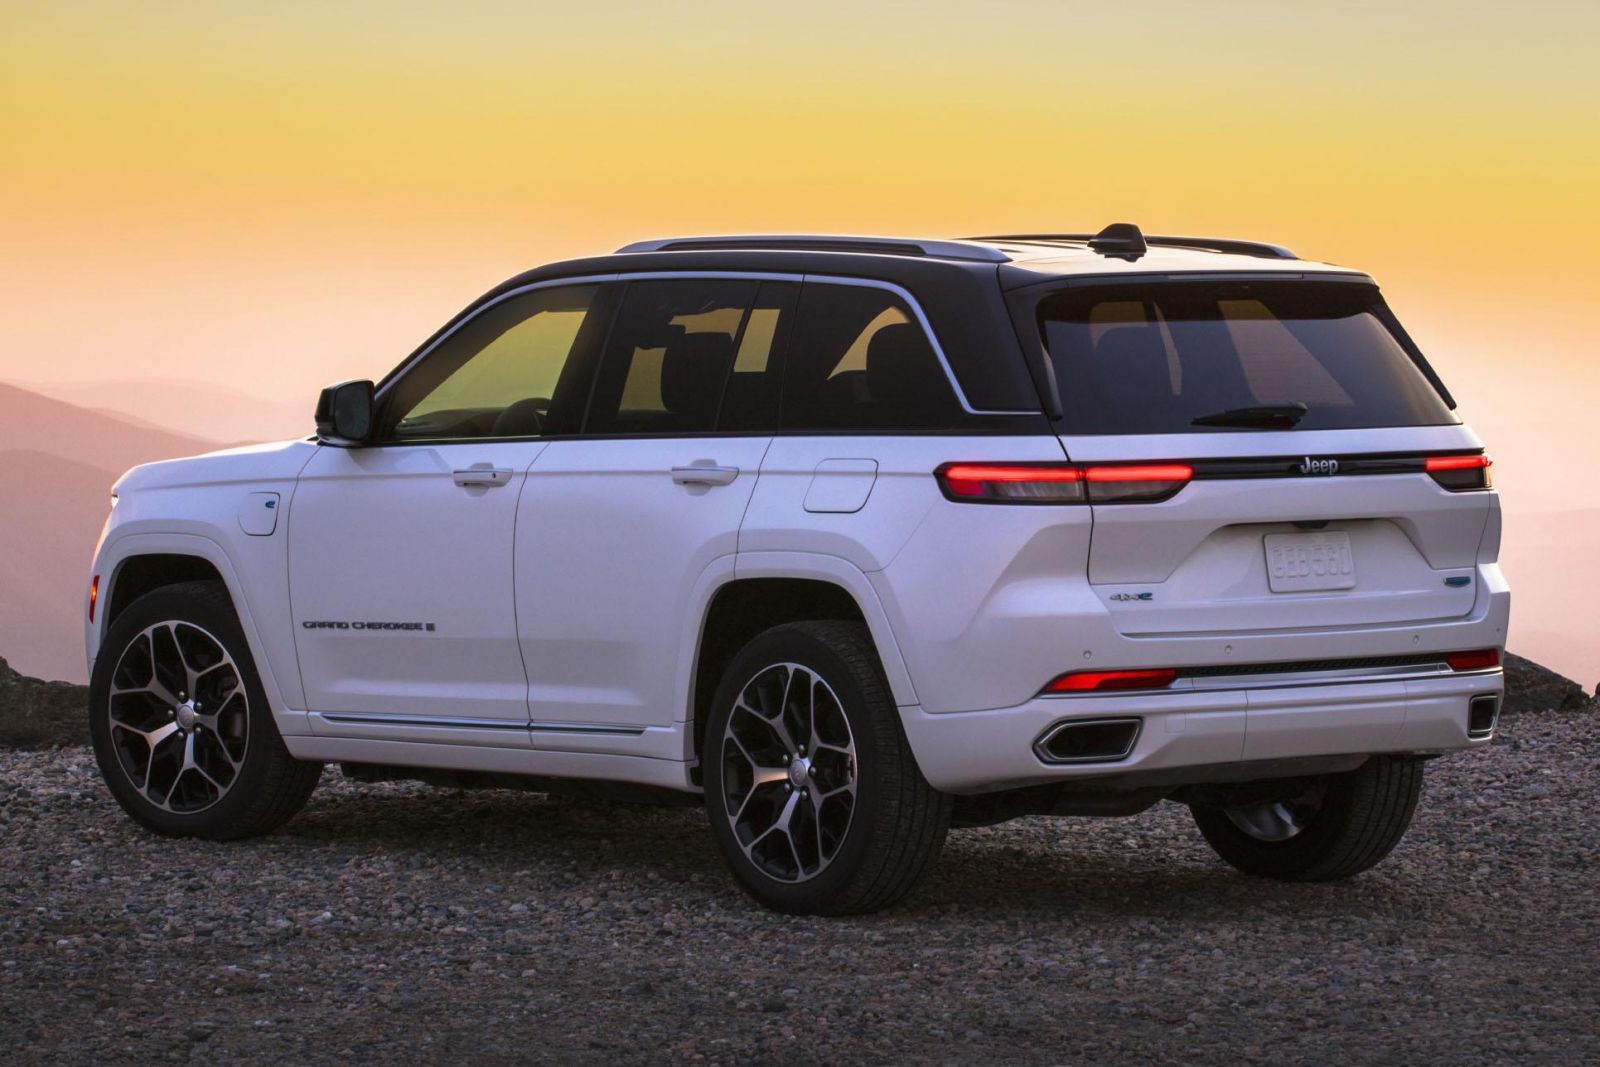 Jeep Grand Cherokee Fiveseat model due late 2022, PHEV early 2023